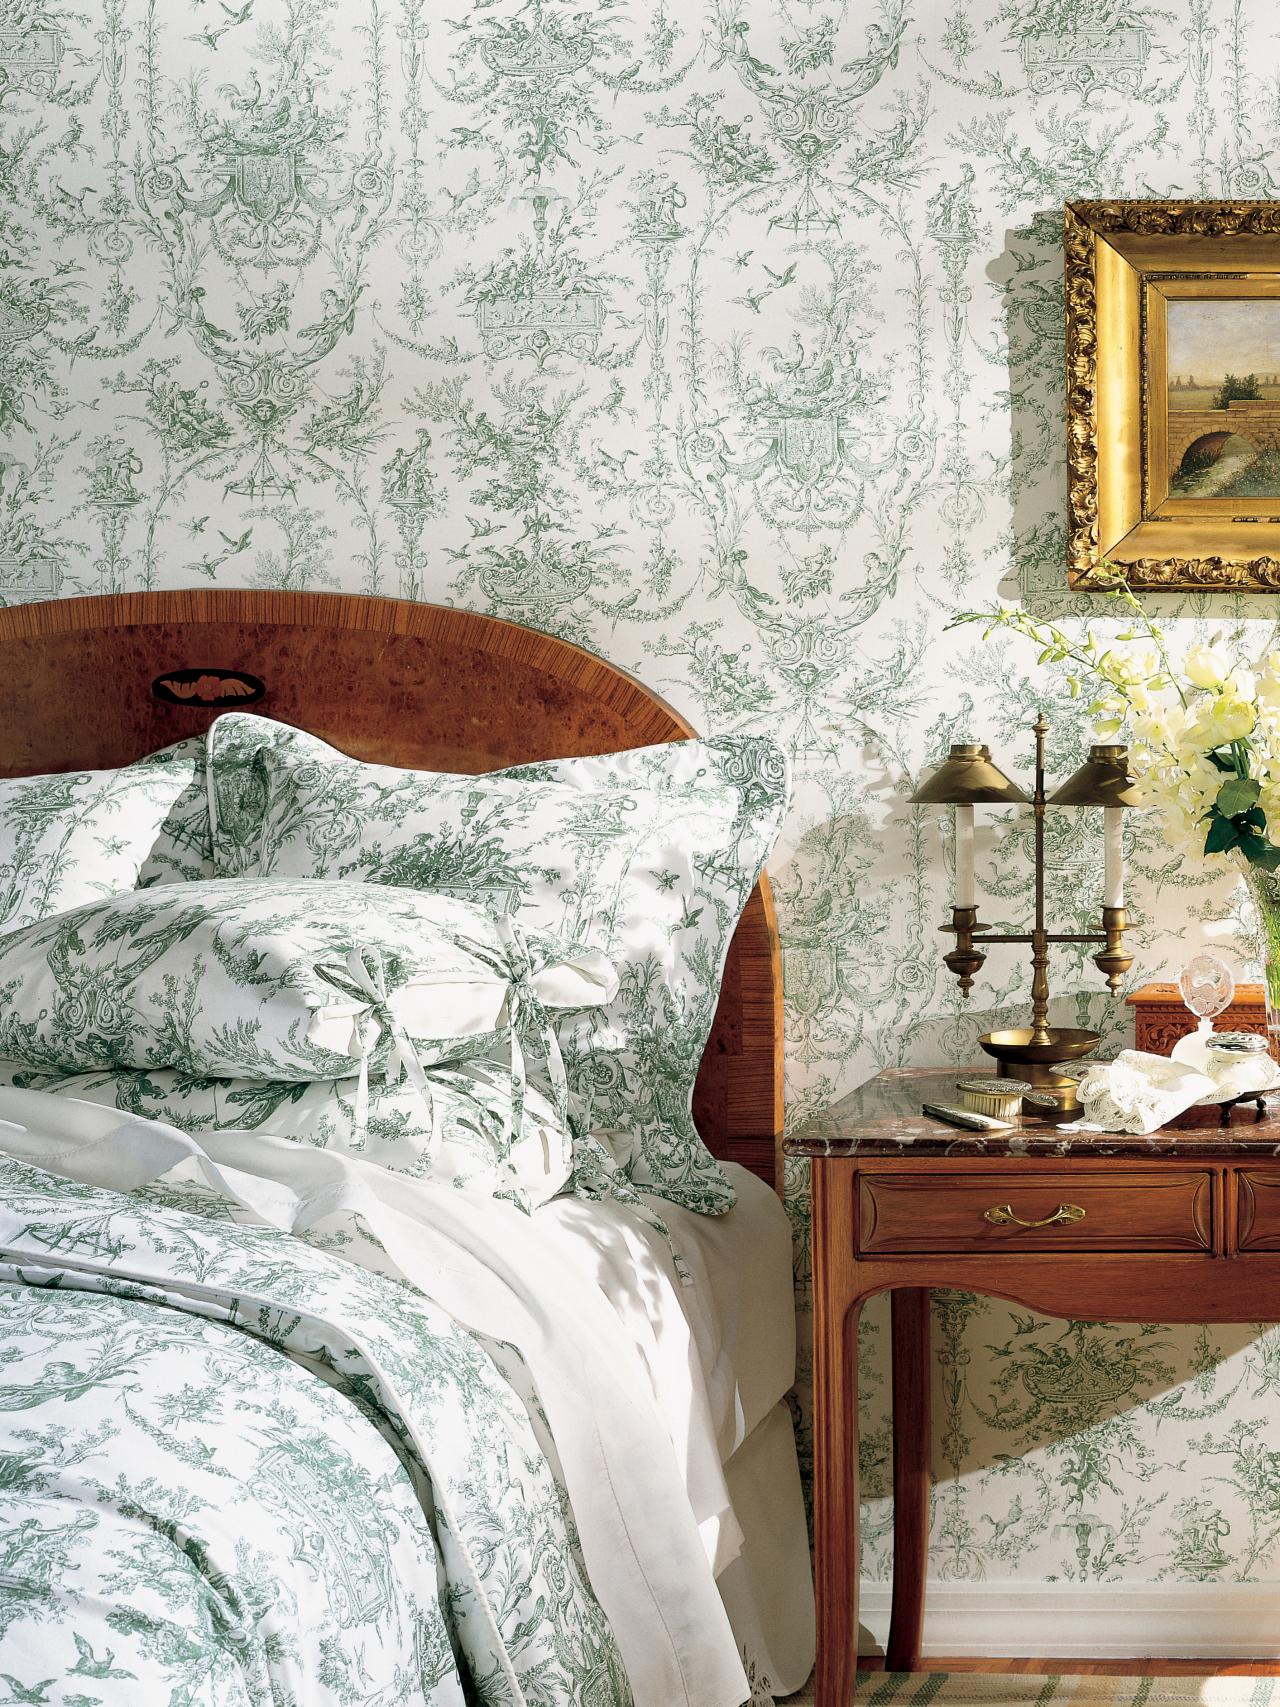 A green toile wallpaper in a bedroom.